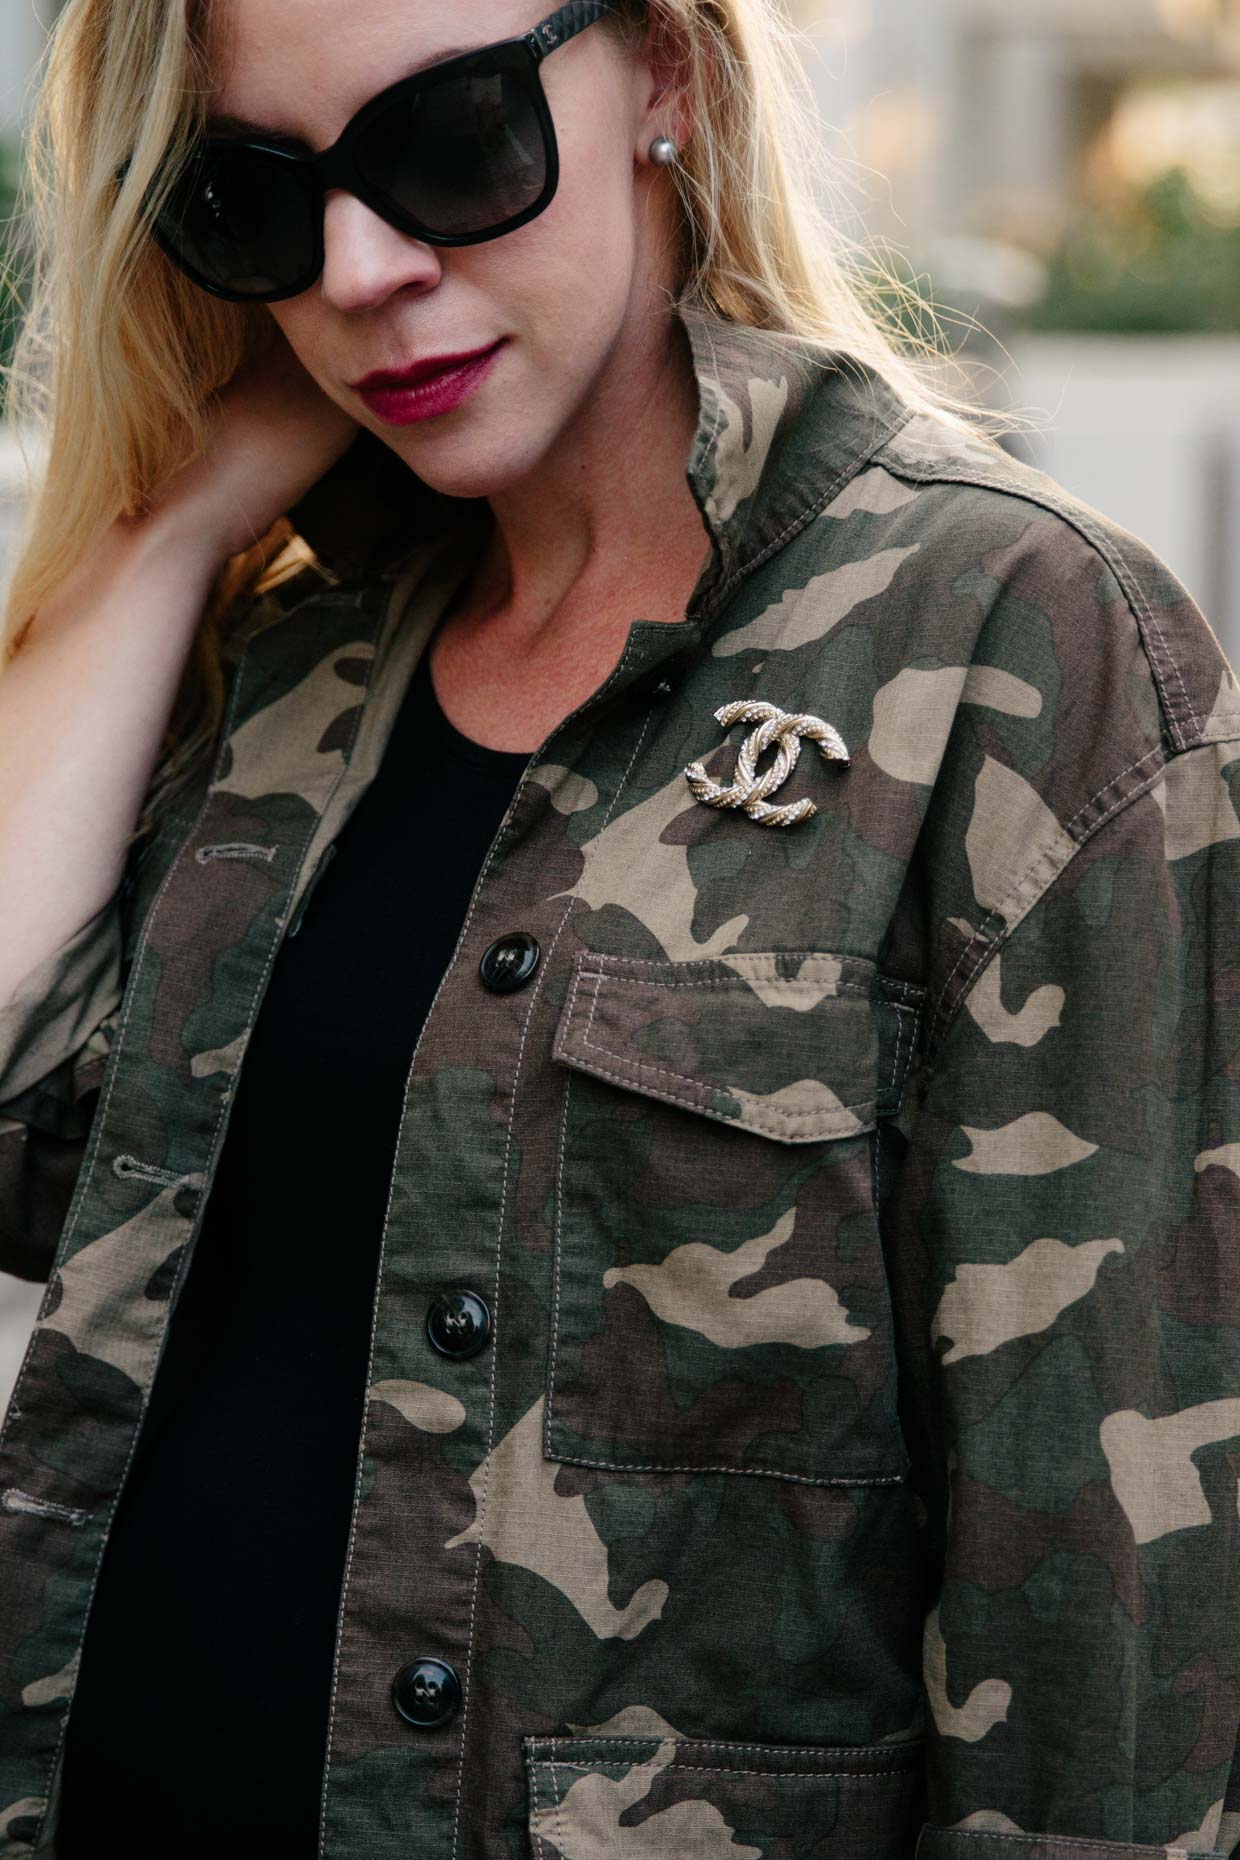 How to dress up camo print by using Chanel brooch pin and chic details,  chic way to wear camo print for fall - Meagan's Moda